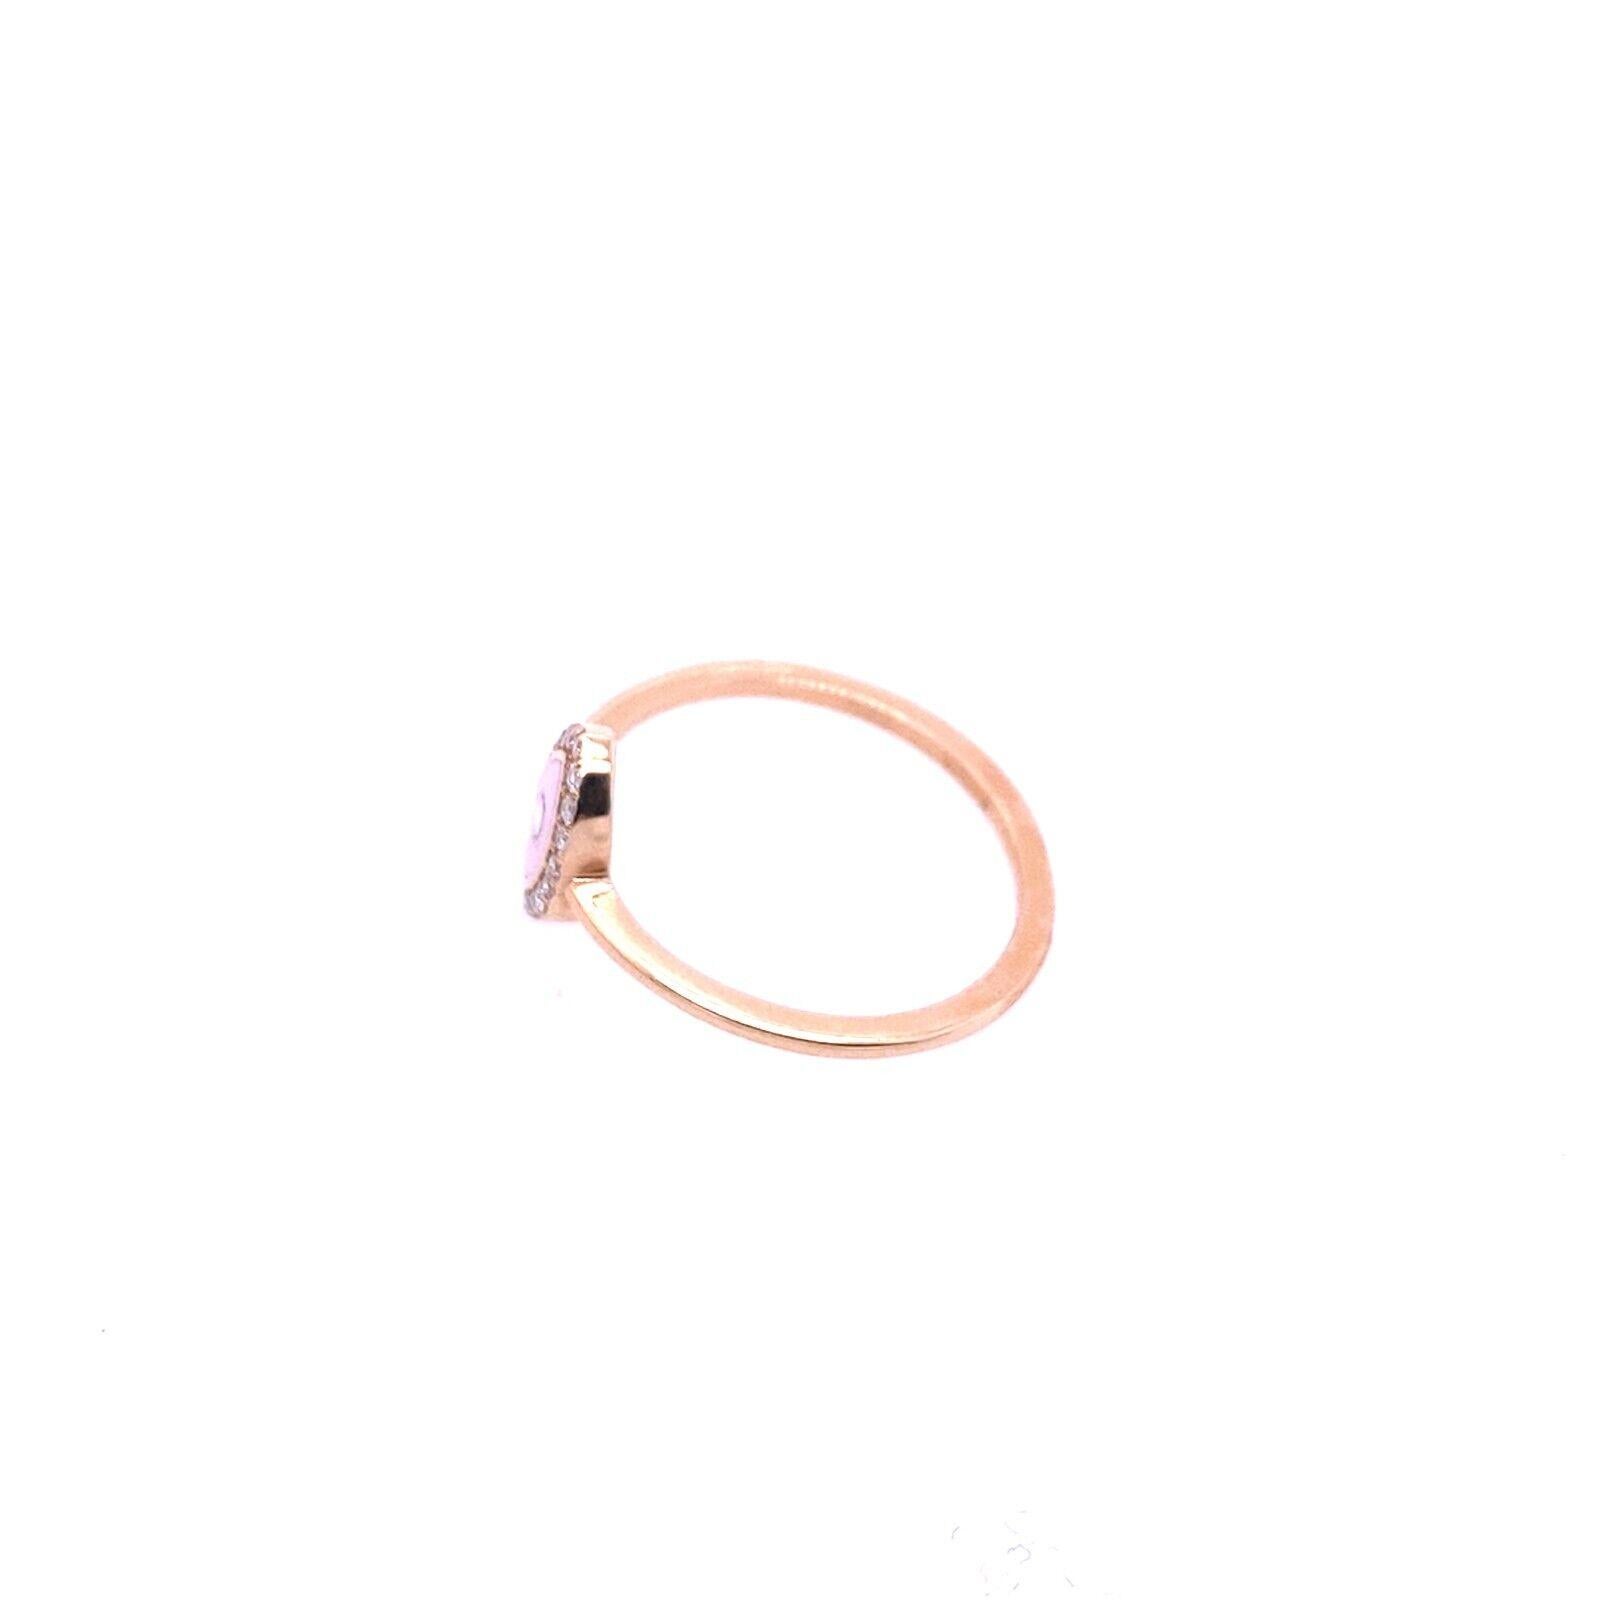 14ct Rose Gold Evil Eye Marquise Shape Ring With Pink Enamel & Diamonds
Additional Information:
Total Diamond Weight: 0.10ct
Diamond Colour: G/H
Diamond Clarity: SI
Total Weight: 1.7g
Finger Size: O
SMS2111